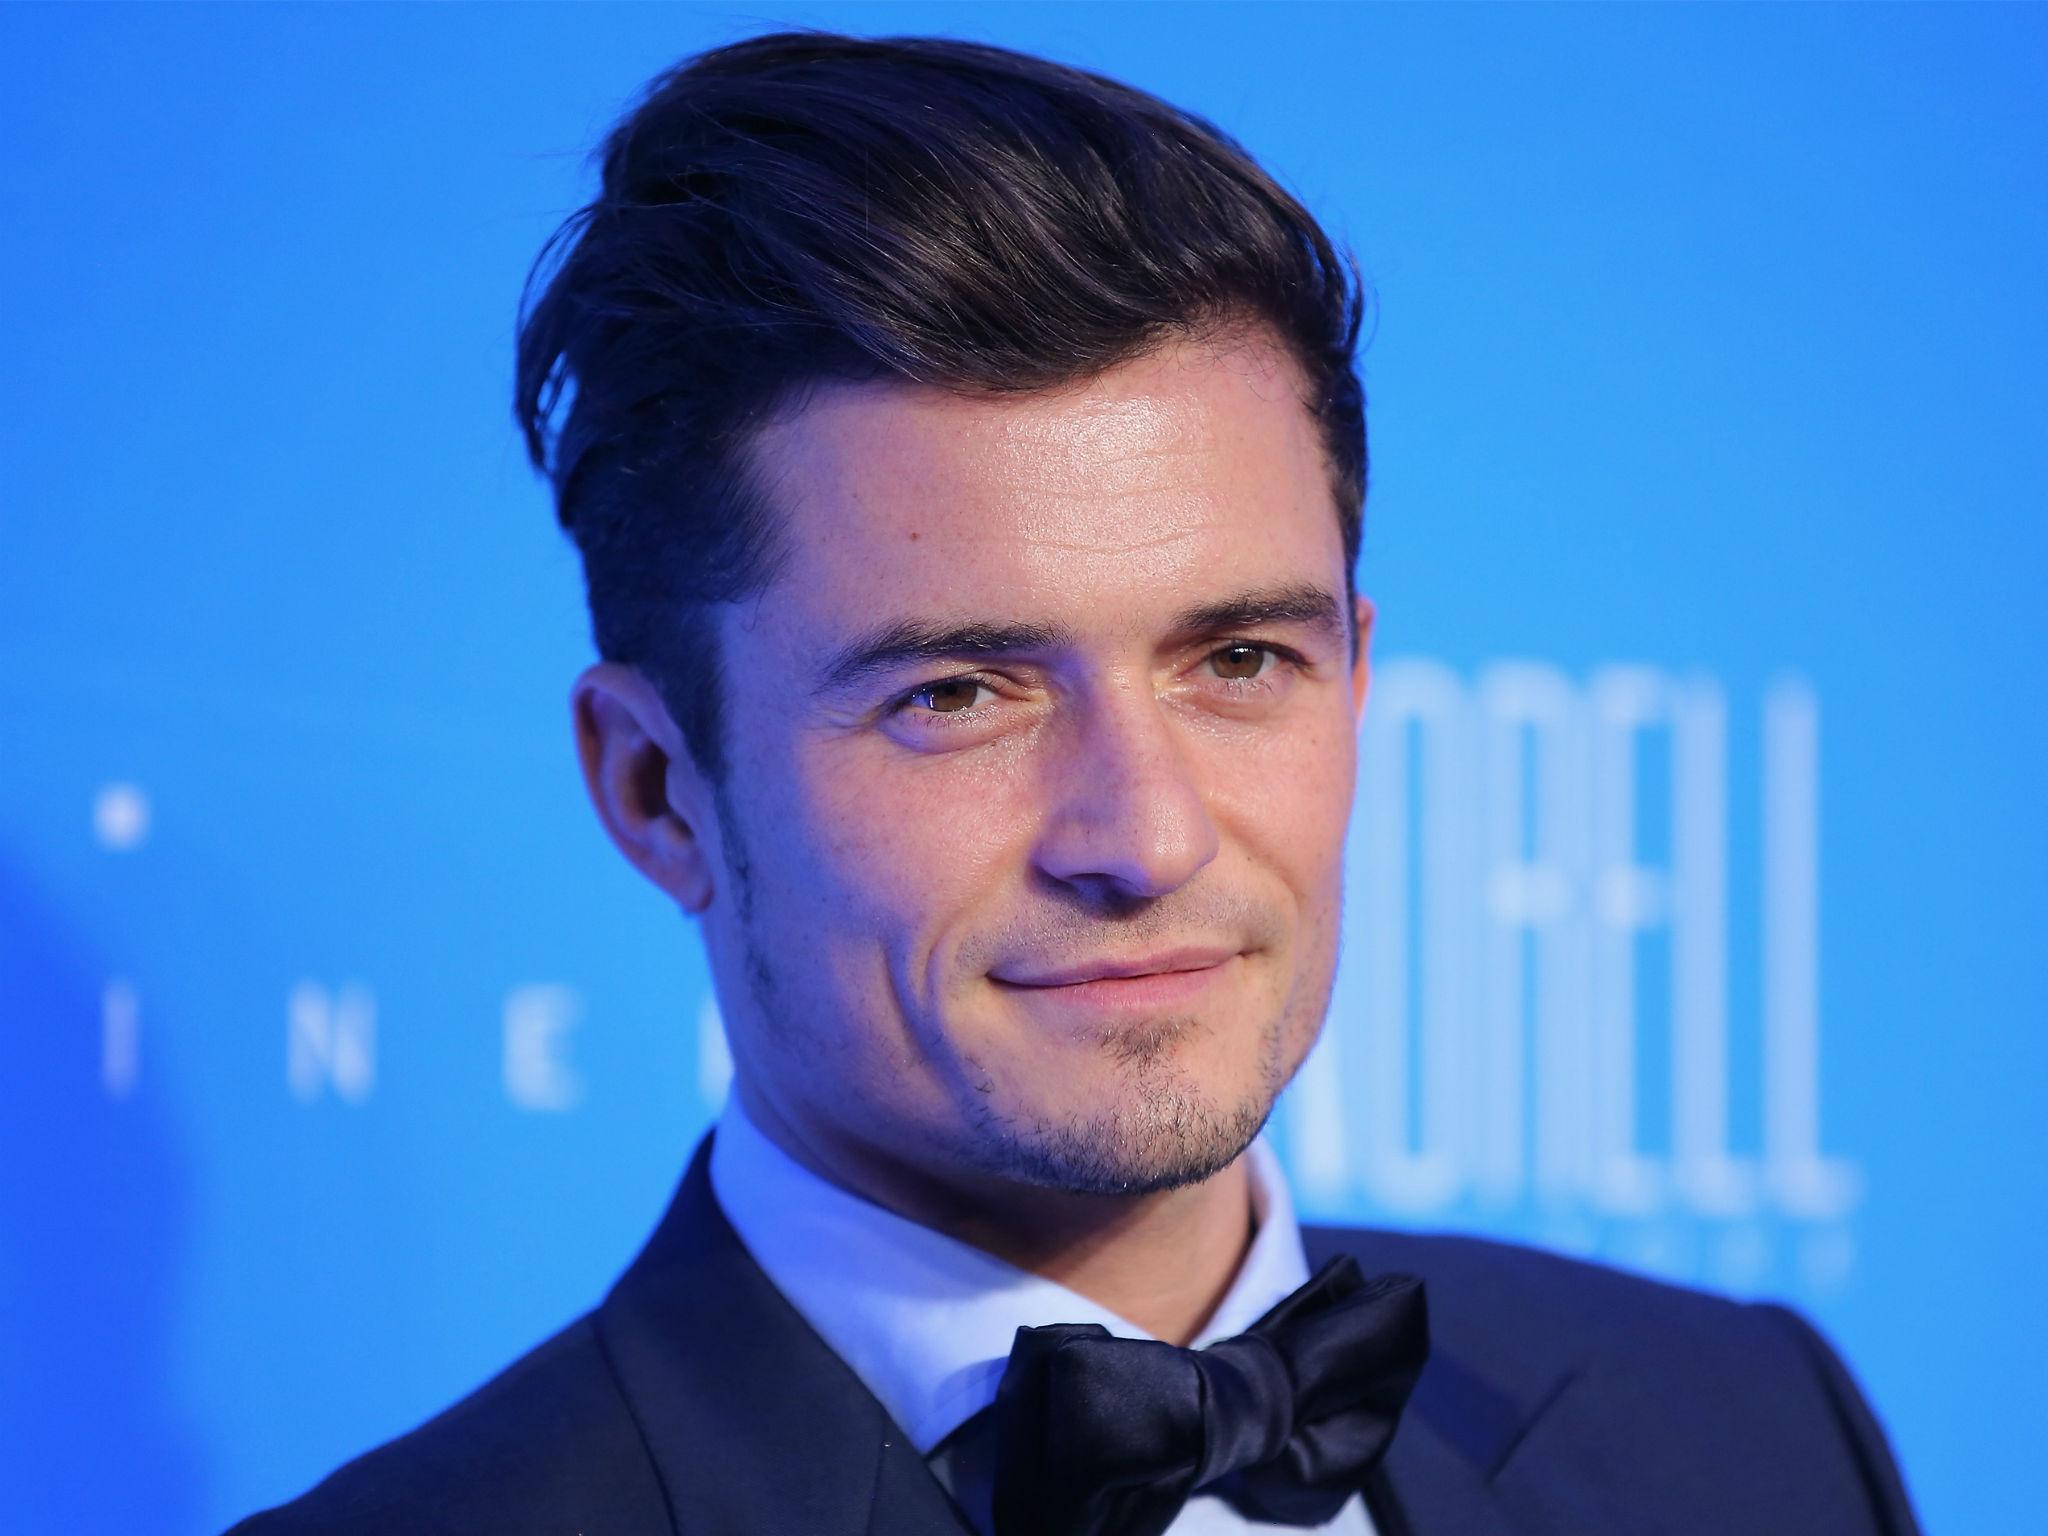 Orlando Bloom Naked Pictures What Privacy Rights Does The -8937